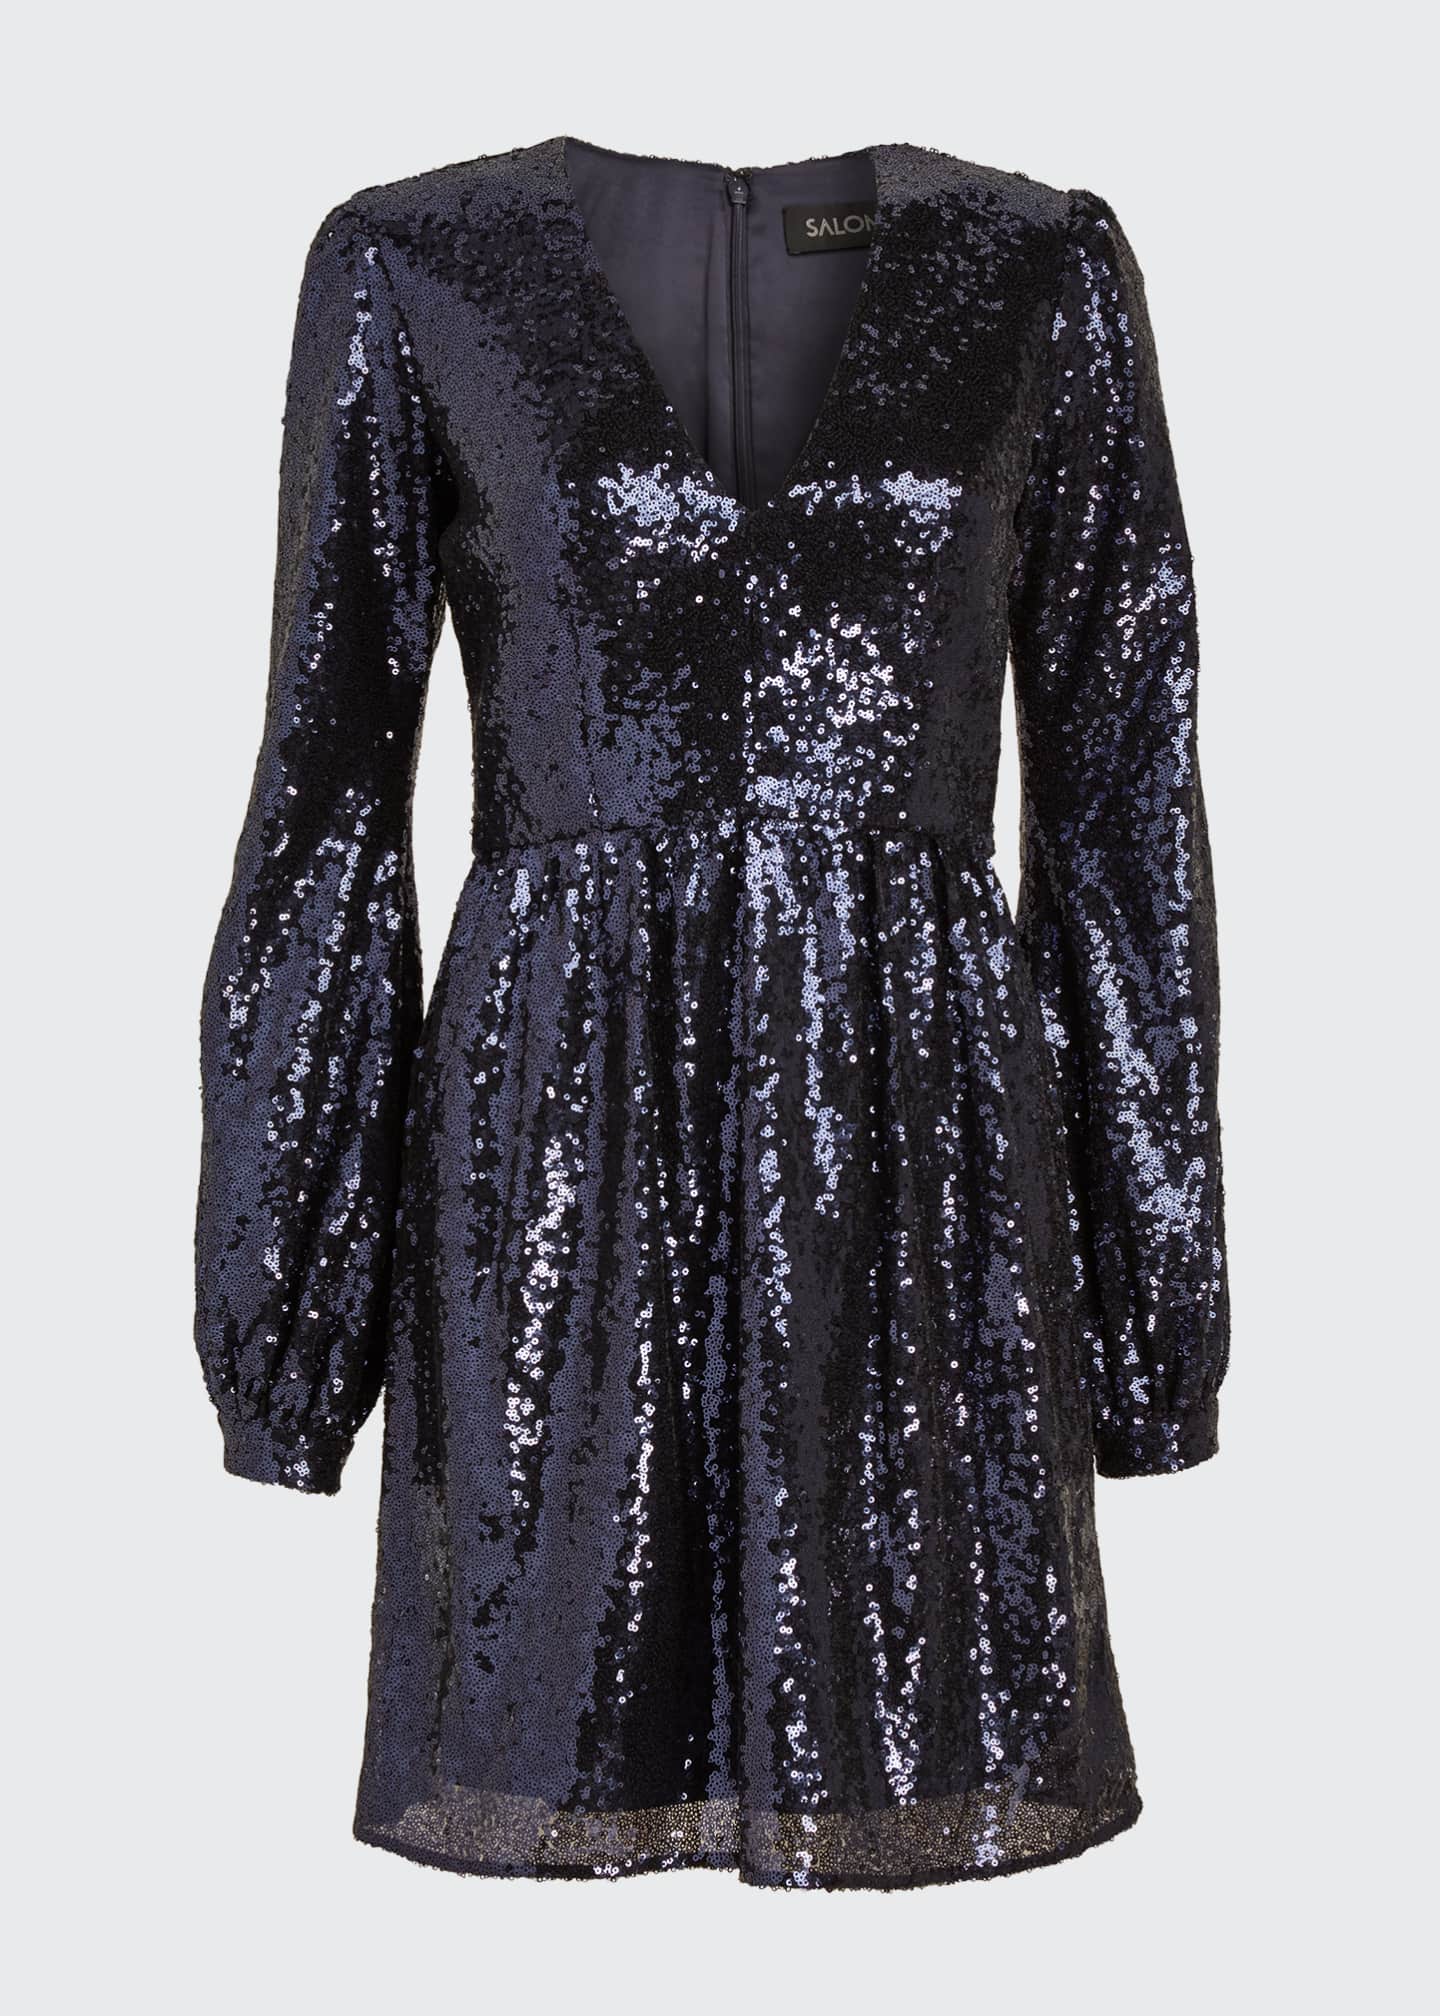 Saloni Camille Sequined Long-Sleeve Cocktail Dress - Bergdorf Goodman